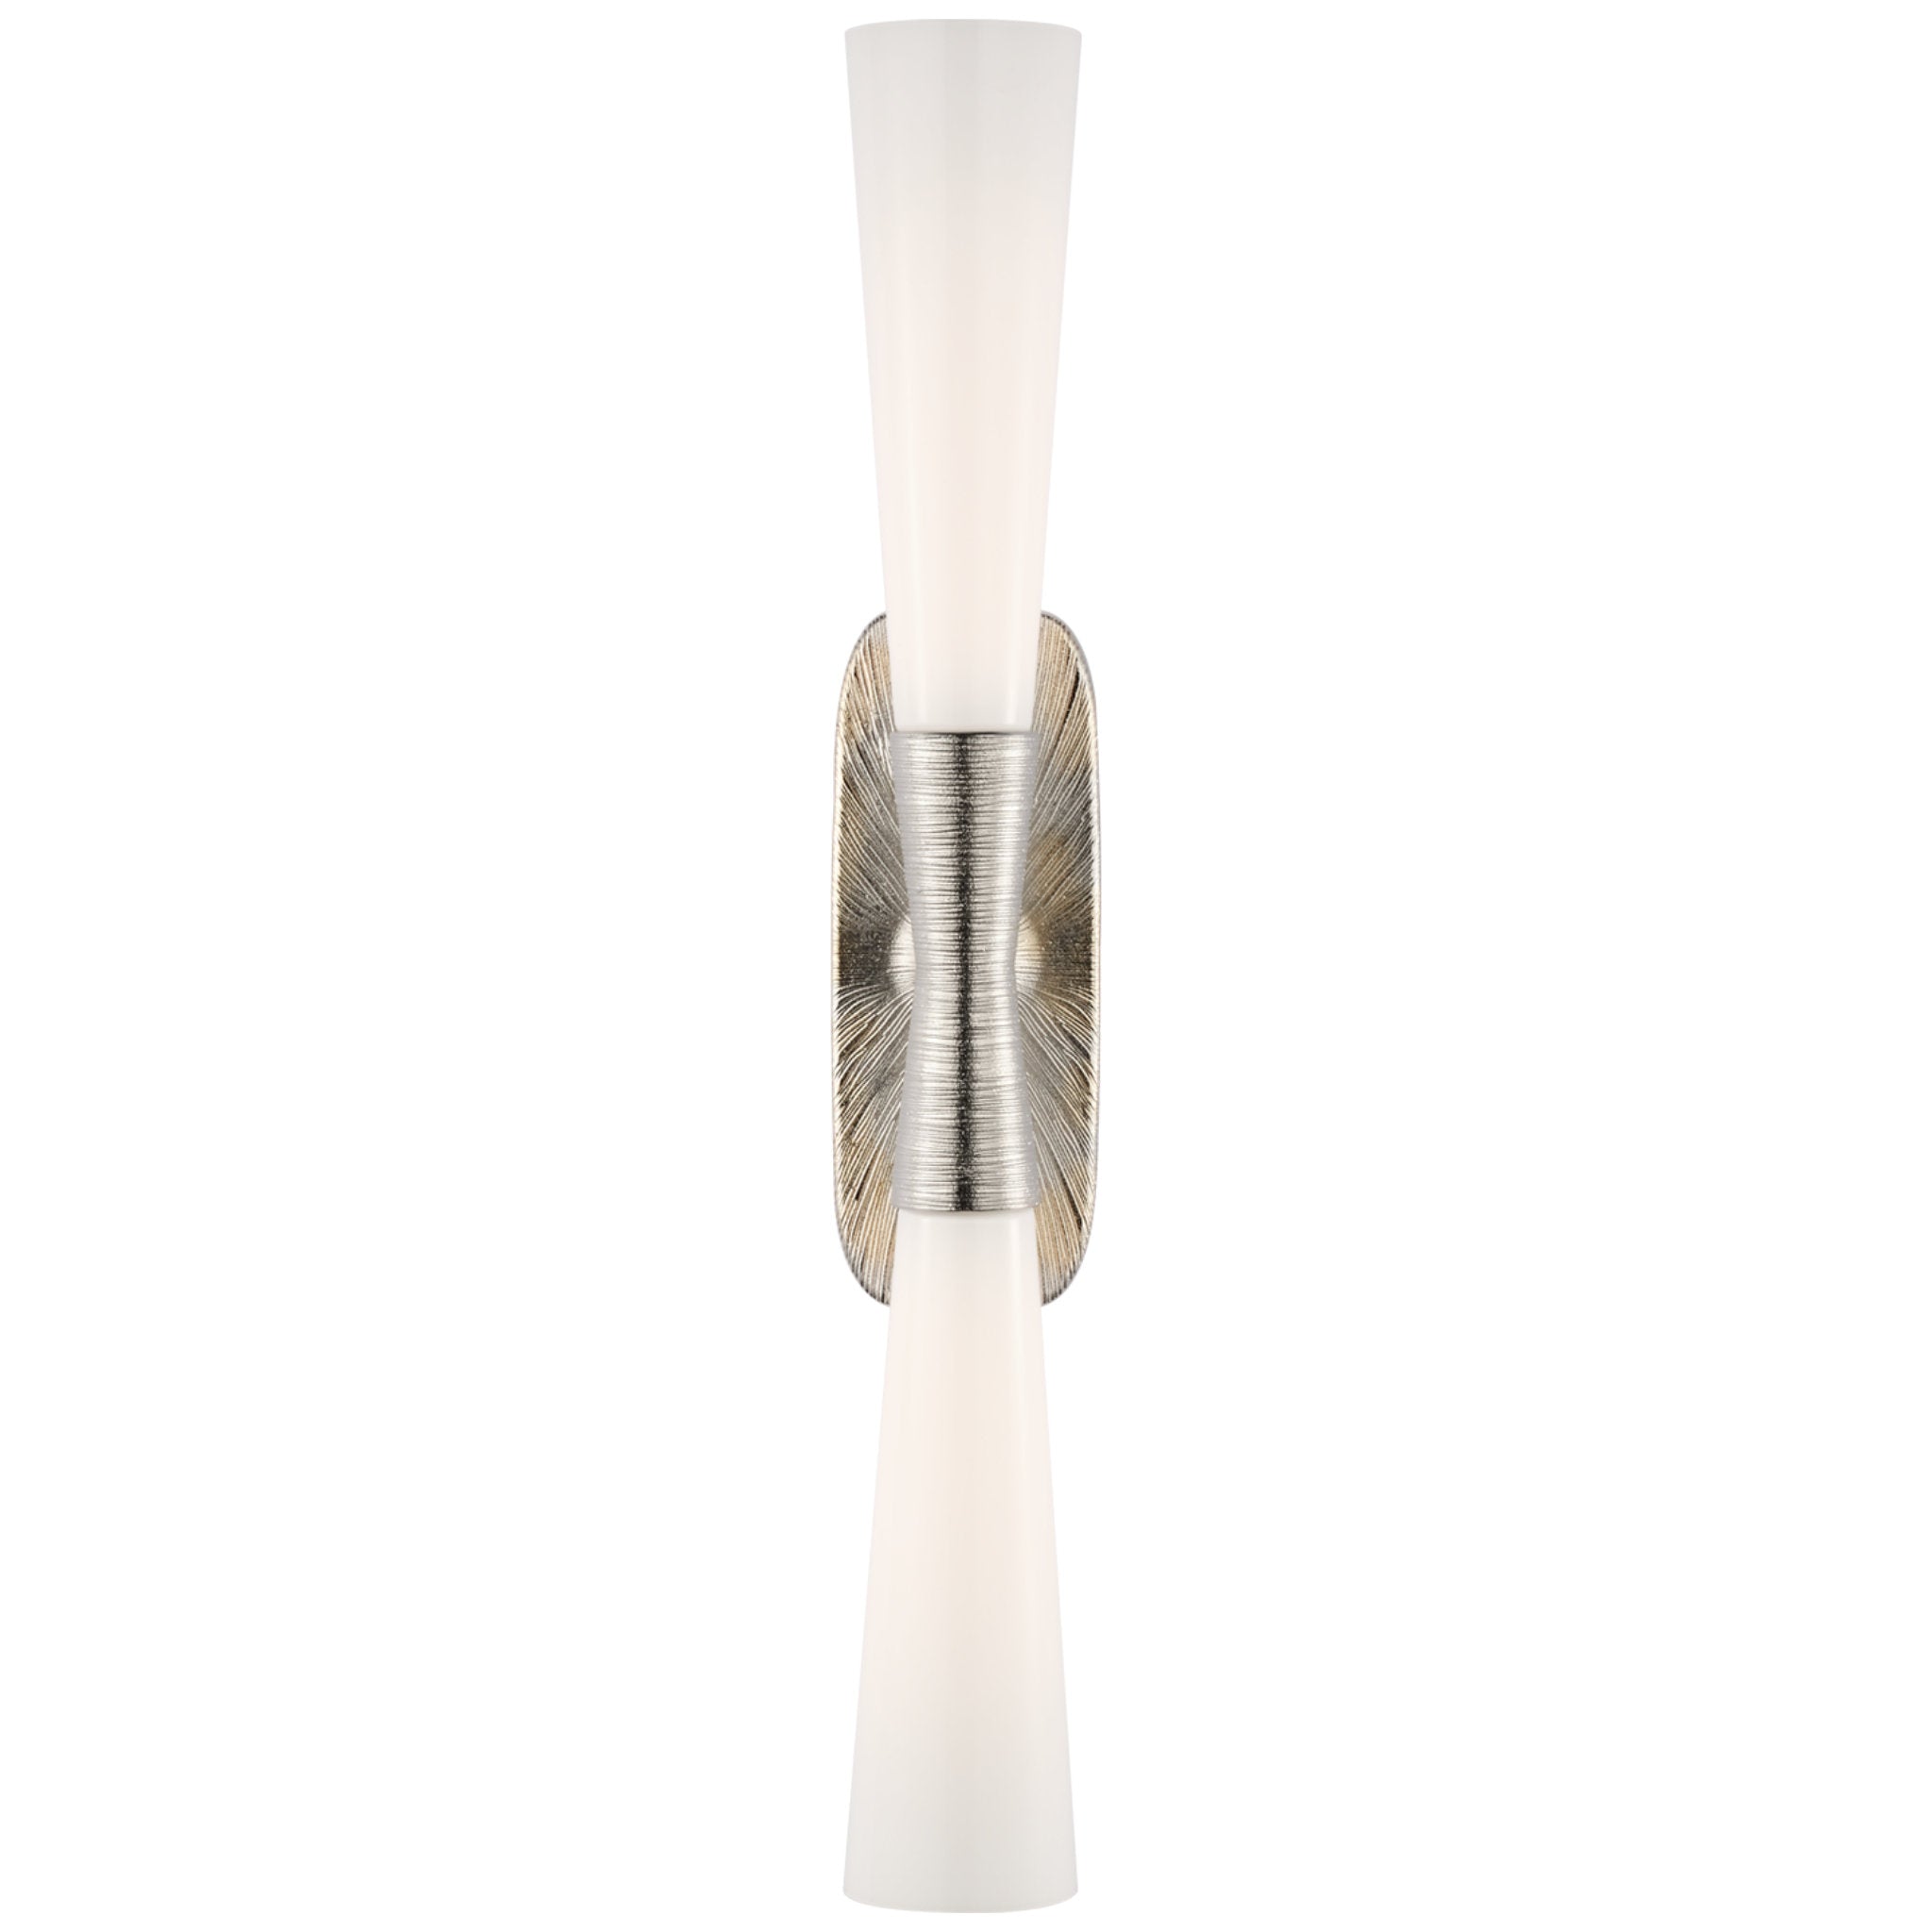 Kelly Wearstler Utopia 32" Double Bath Sconce in Polished Nickel with White Glass